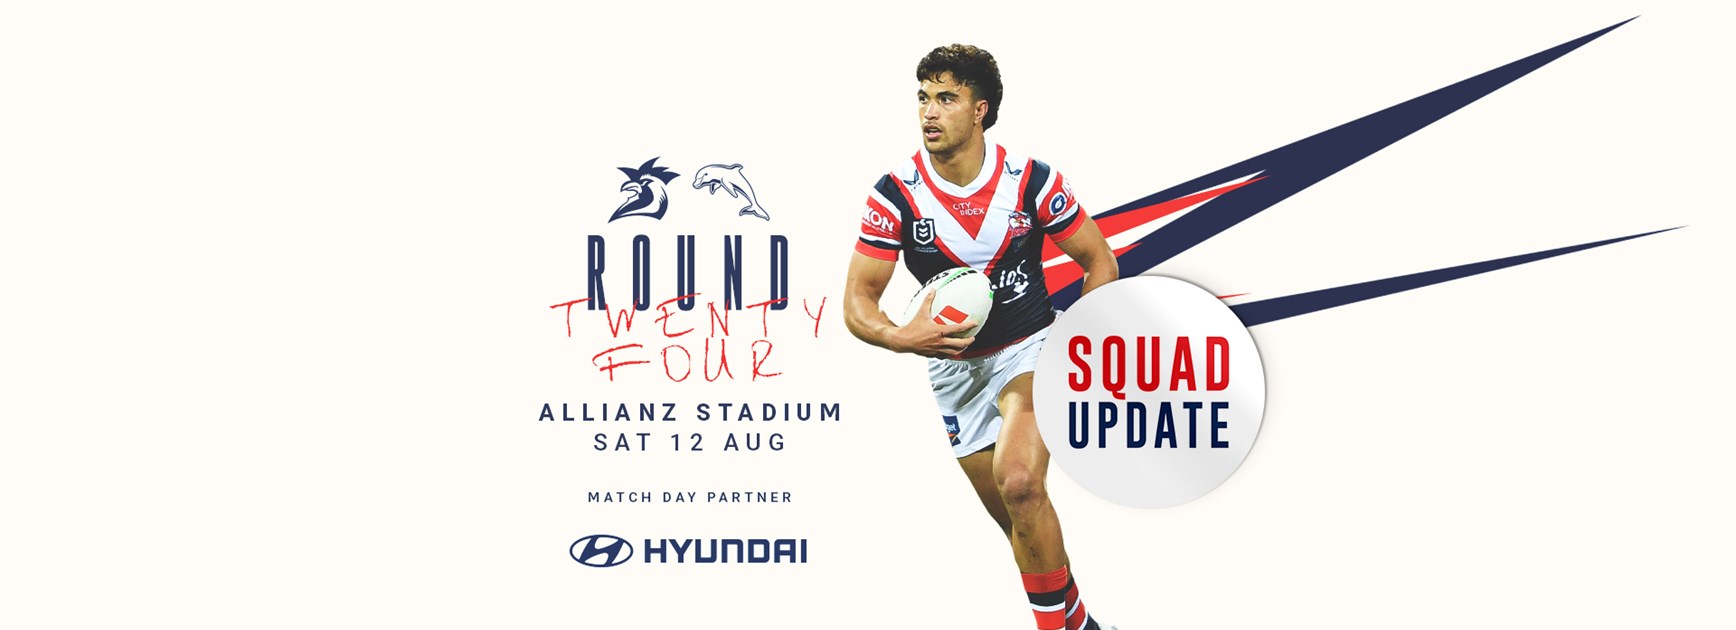 Squad Update: Round 24 vs Dolphins